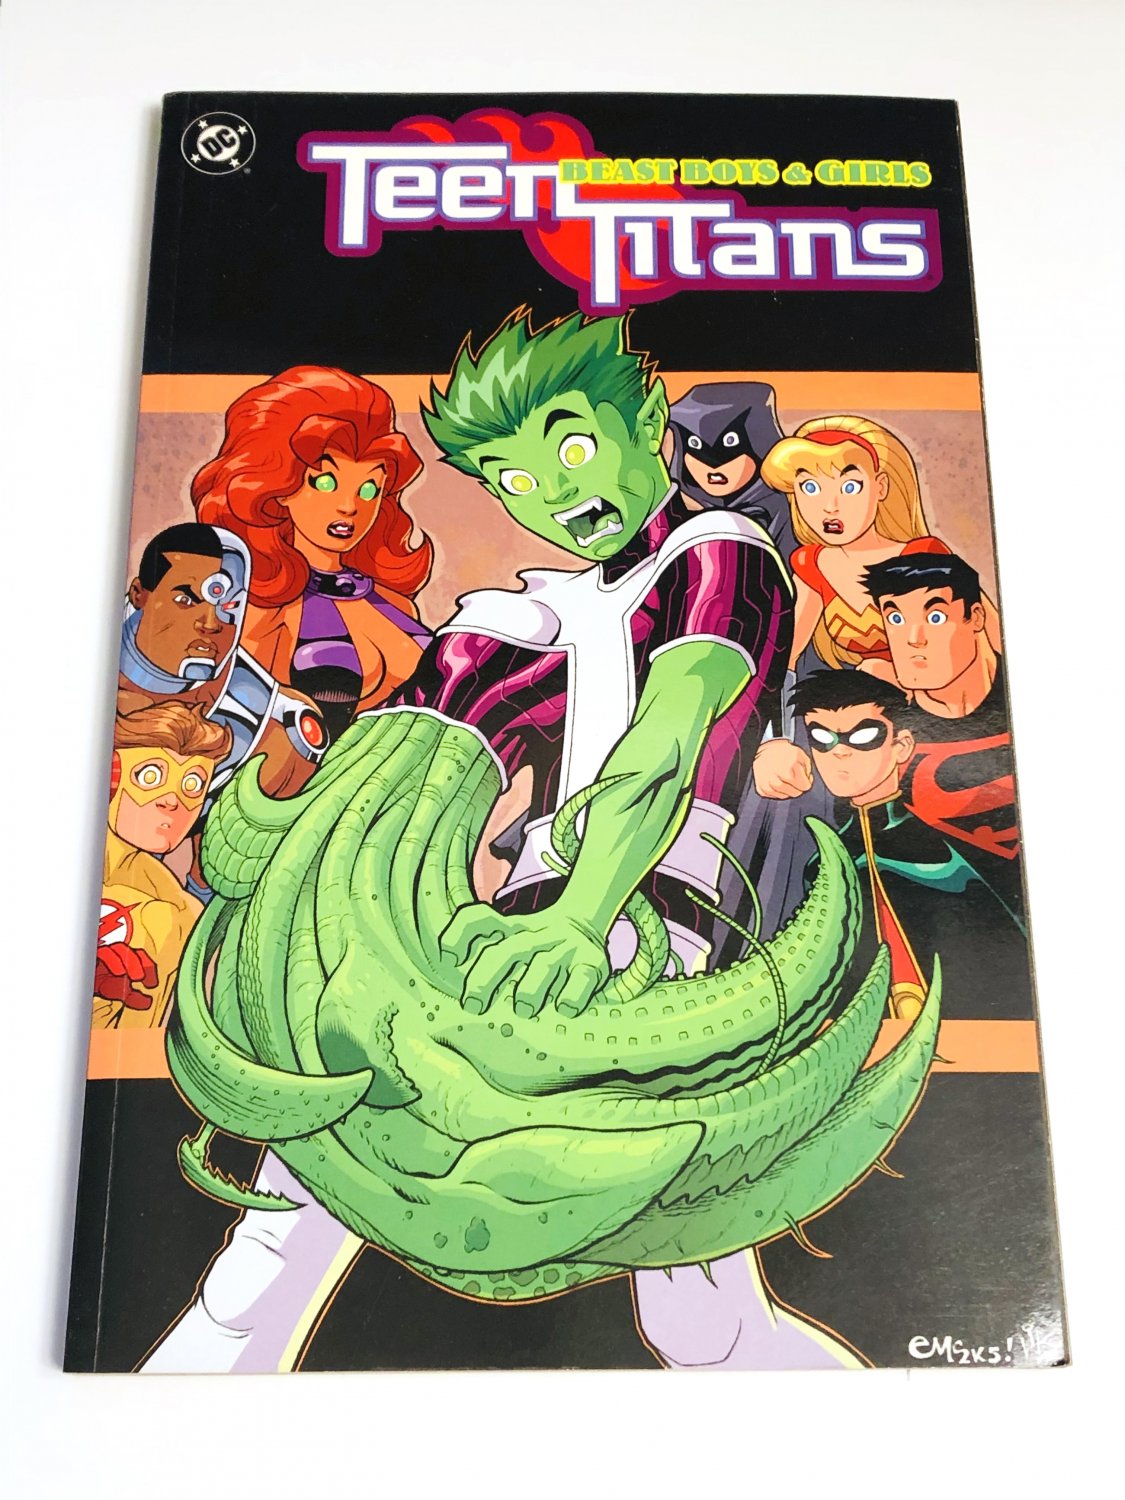 Teen Titans VOL 03: Beast Boys and Girls by Ben Raab and Geoff Johns (2005)